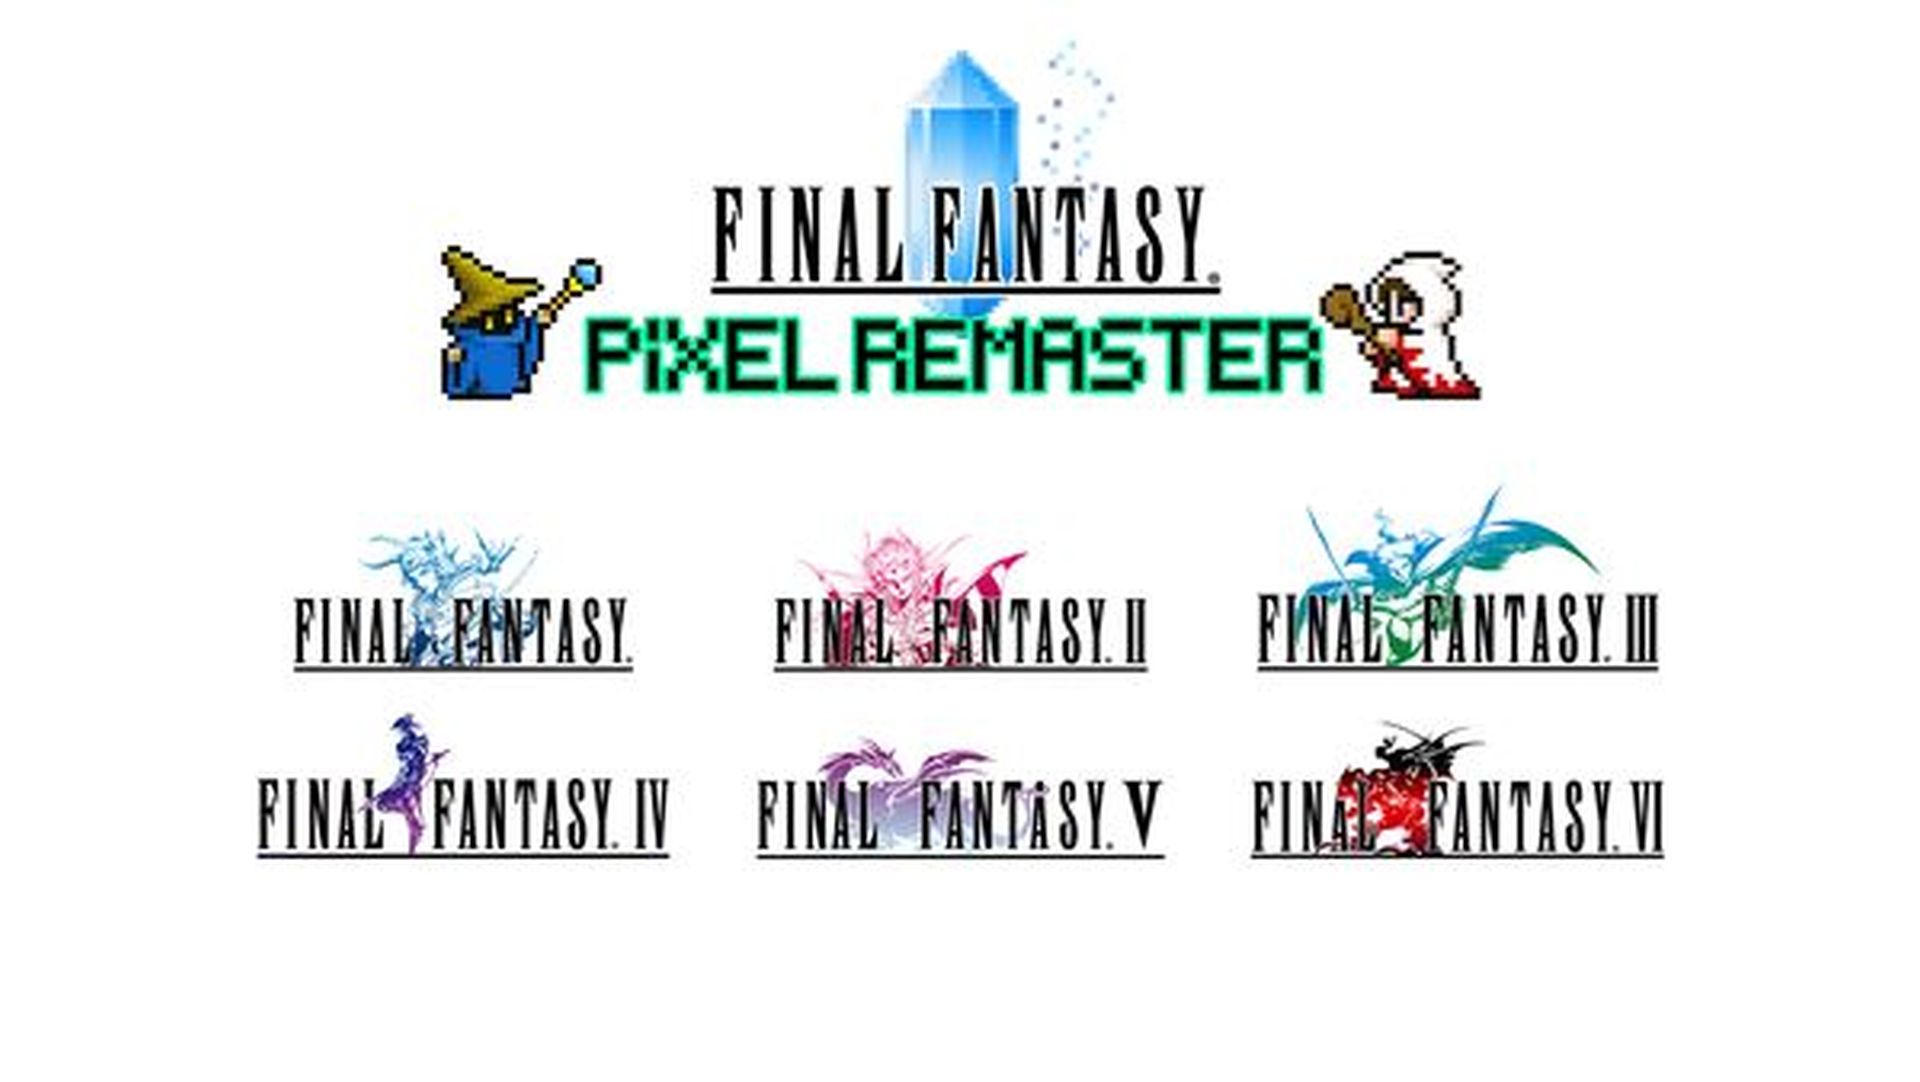 Final Fantasy Pixel Remaster on PC Finally Gets Assistance Features, Classic Font